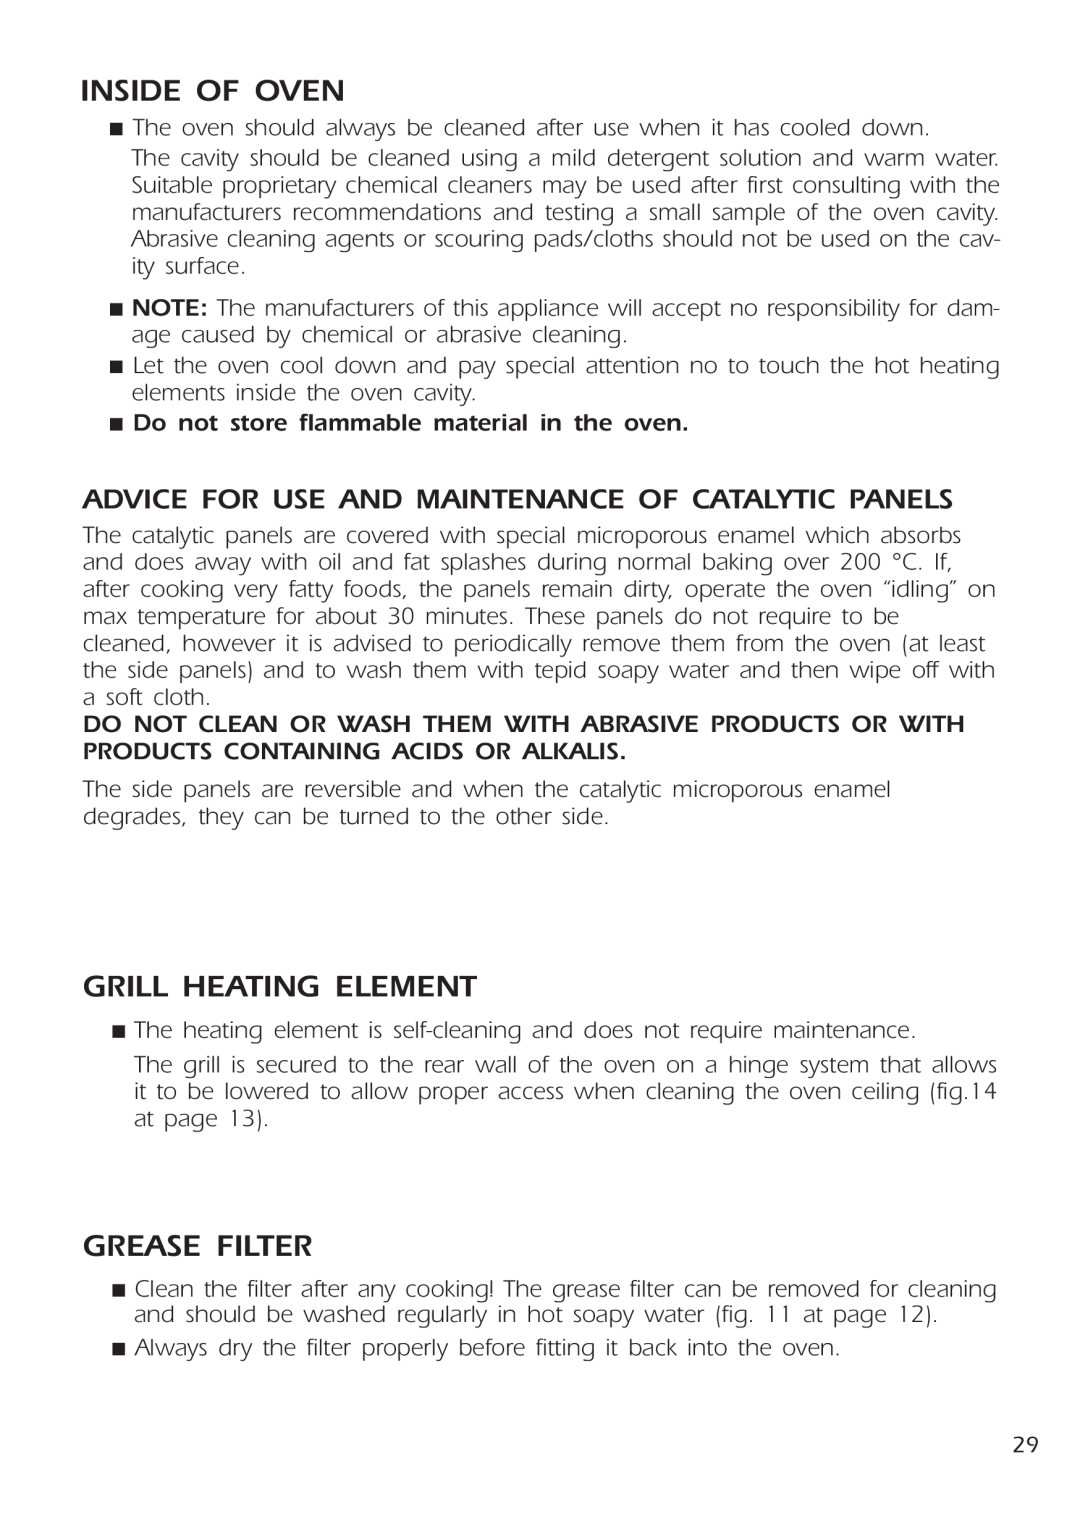 DeLonghi DE 91 MPS manual Inside Of Oven, Grill Heating Element, Advice For Use And Maintenance Of Catalytic Panels 